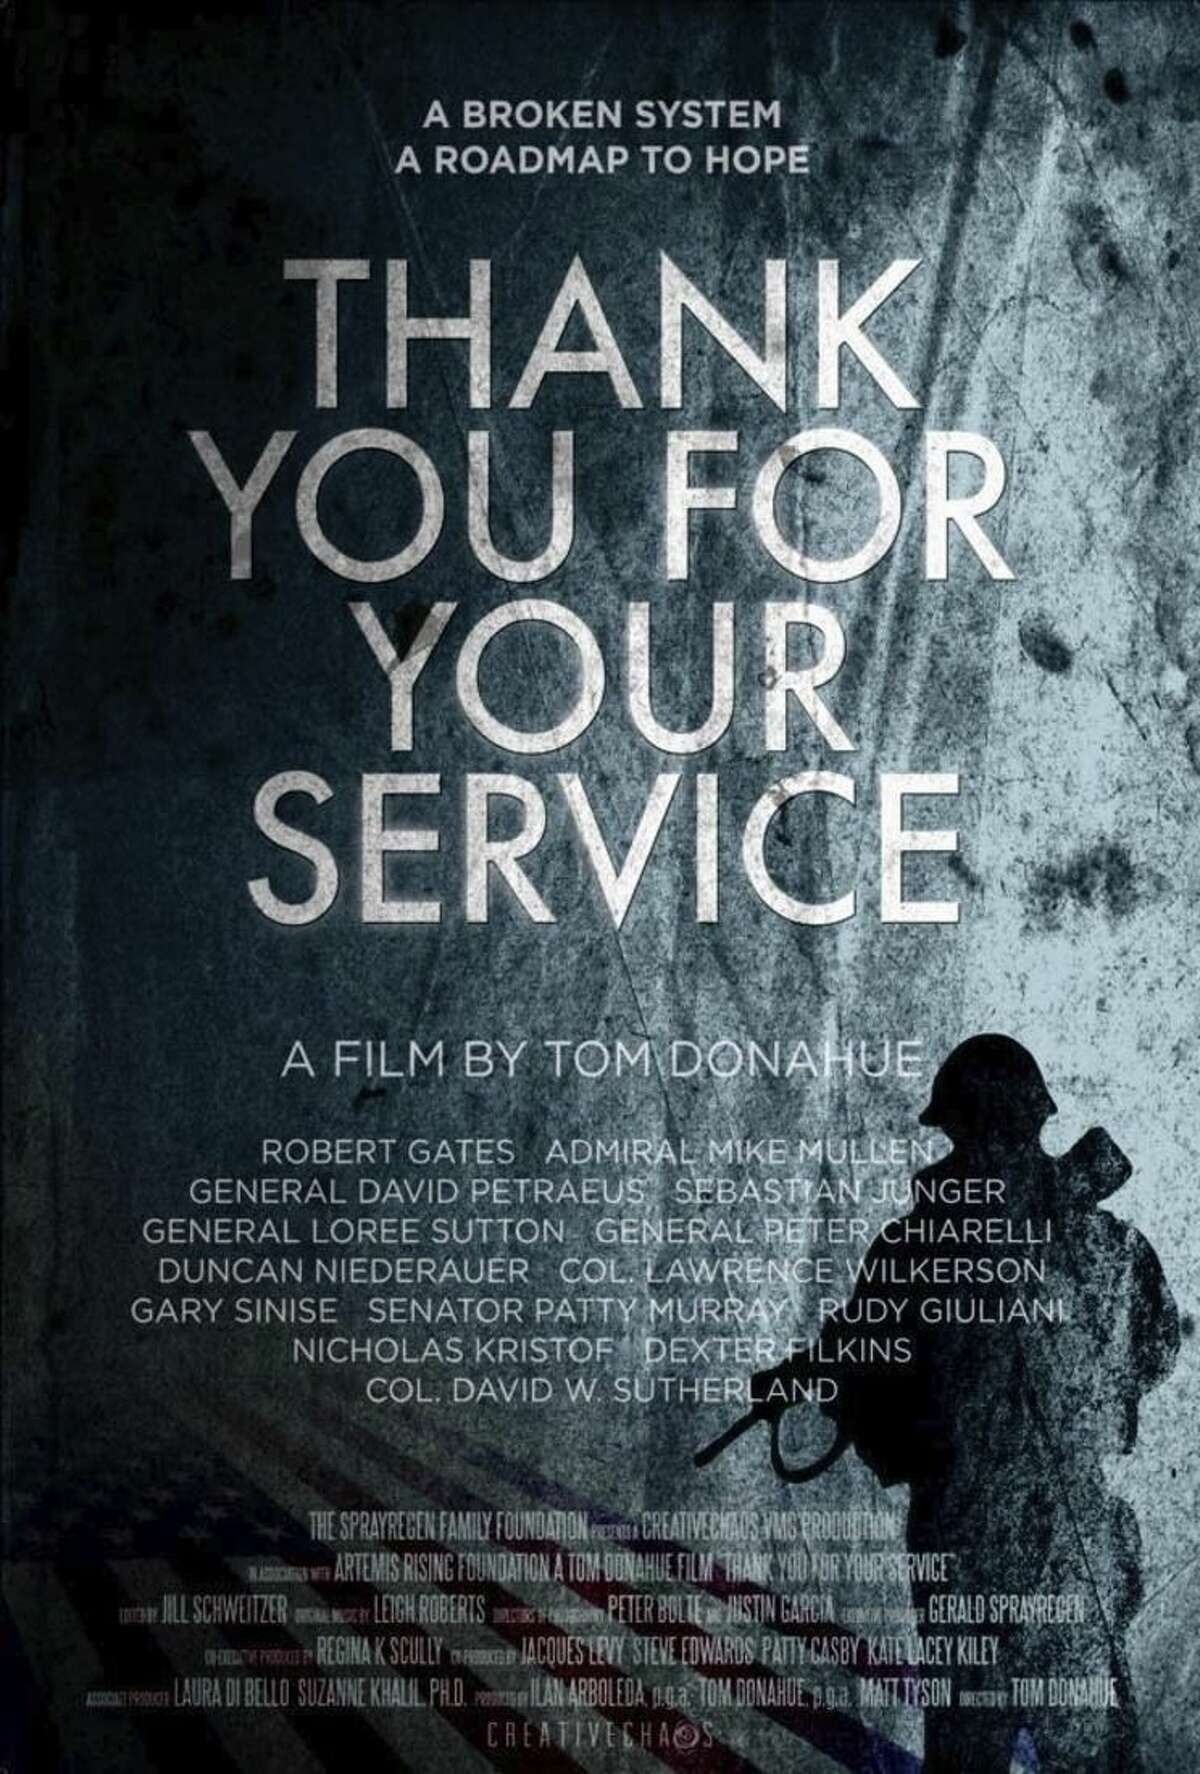 Avon To Screen "Thank You For Your Service"